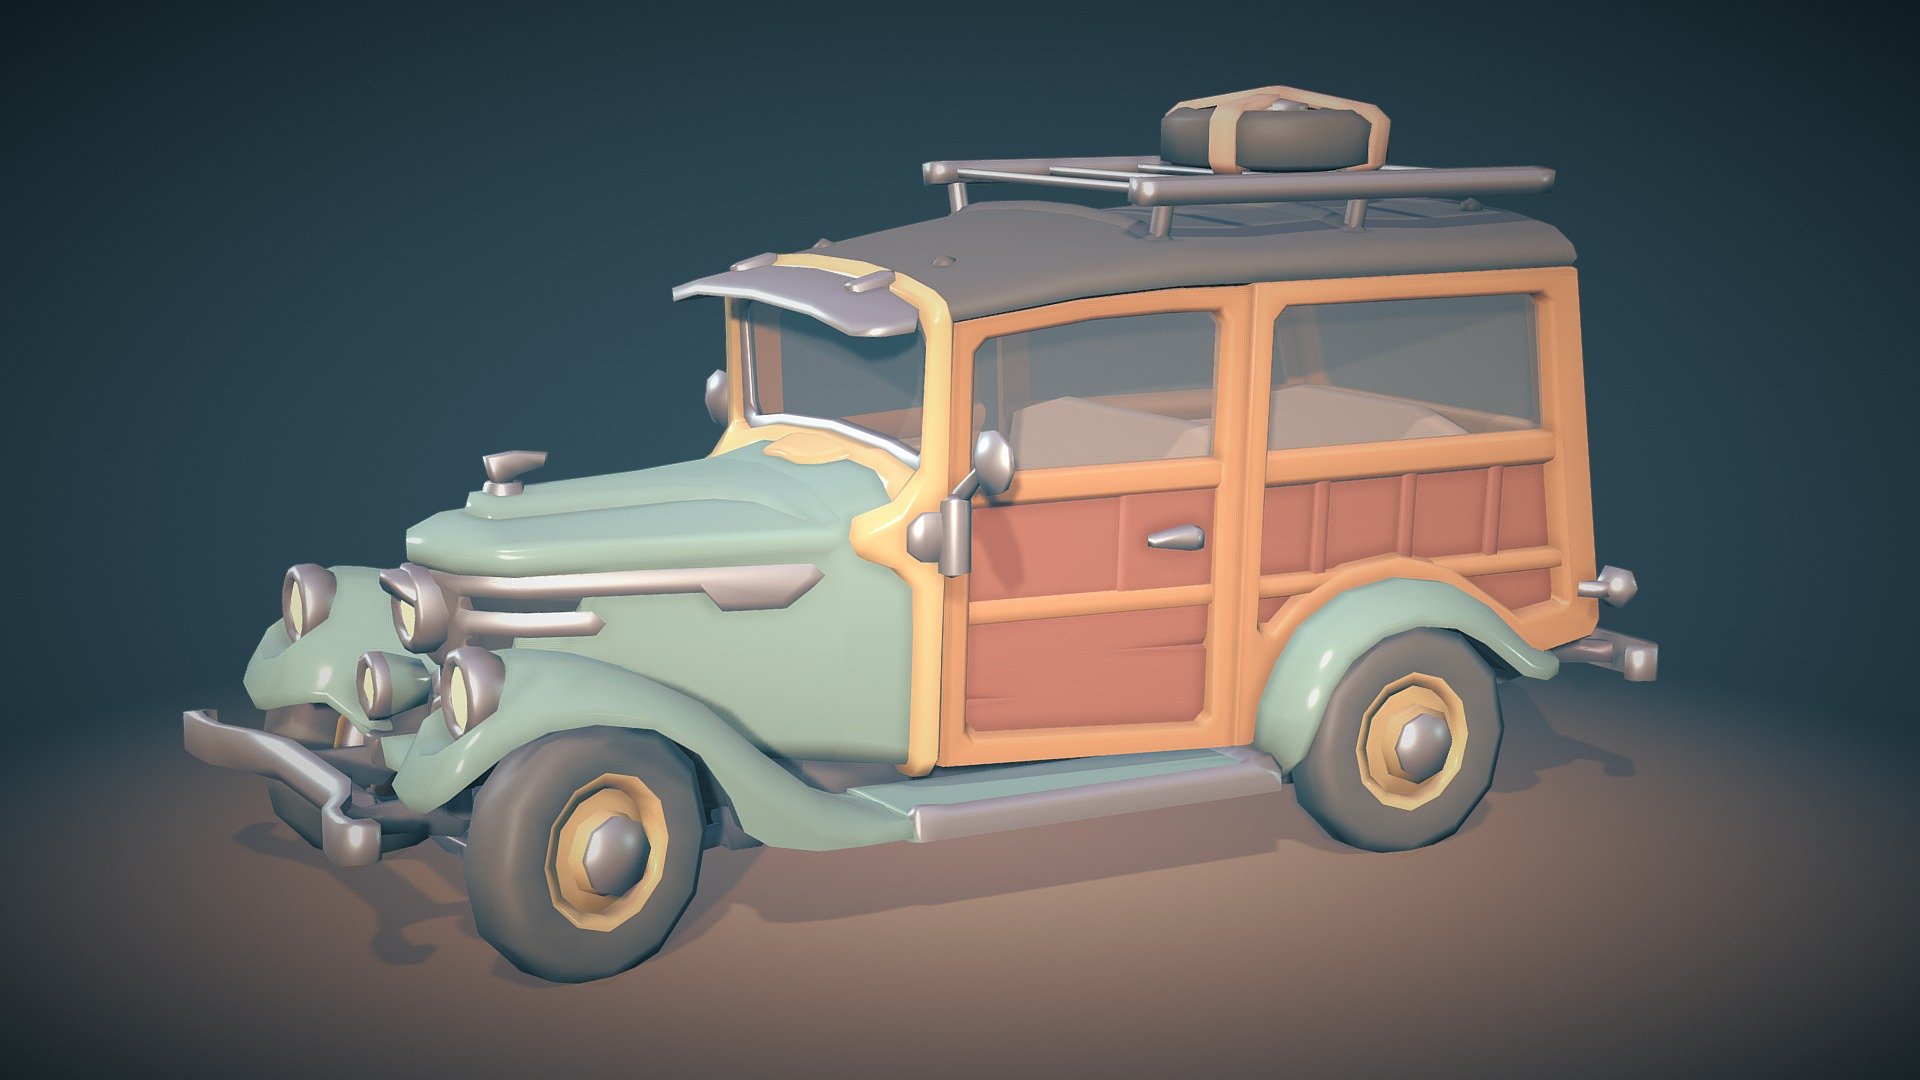 15 vehicles in the package so far (and will be a couple more), hope to release it by the spring 3d model